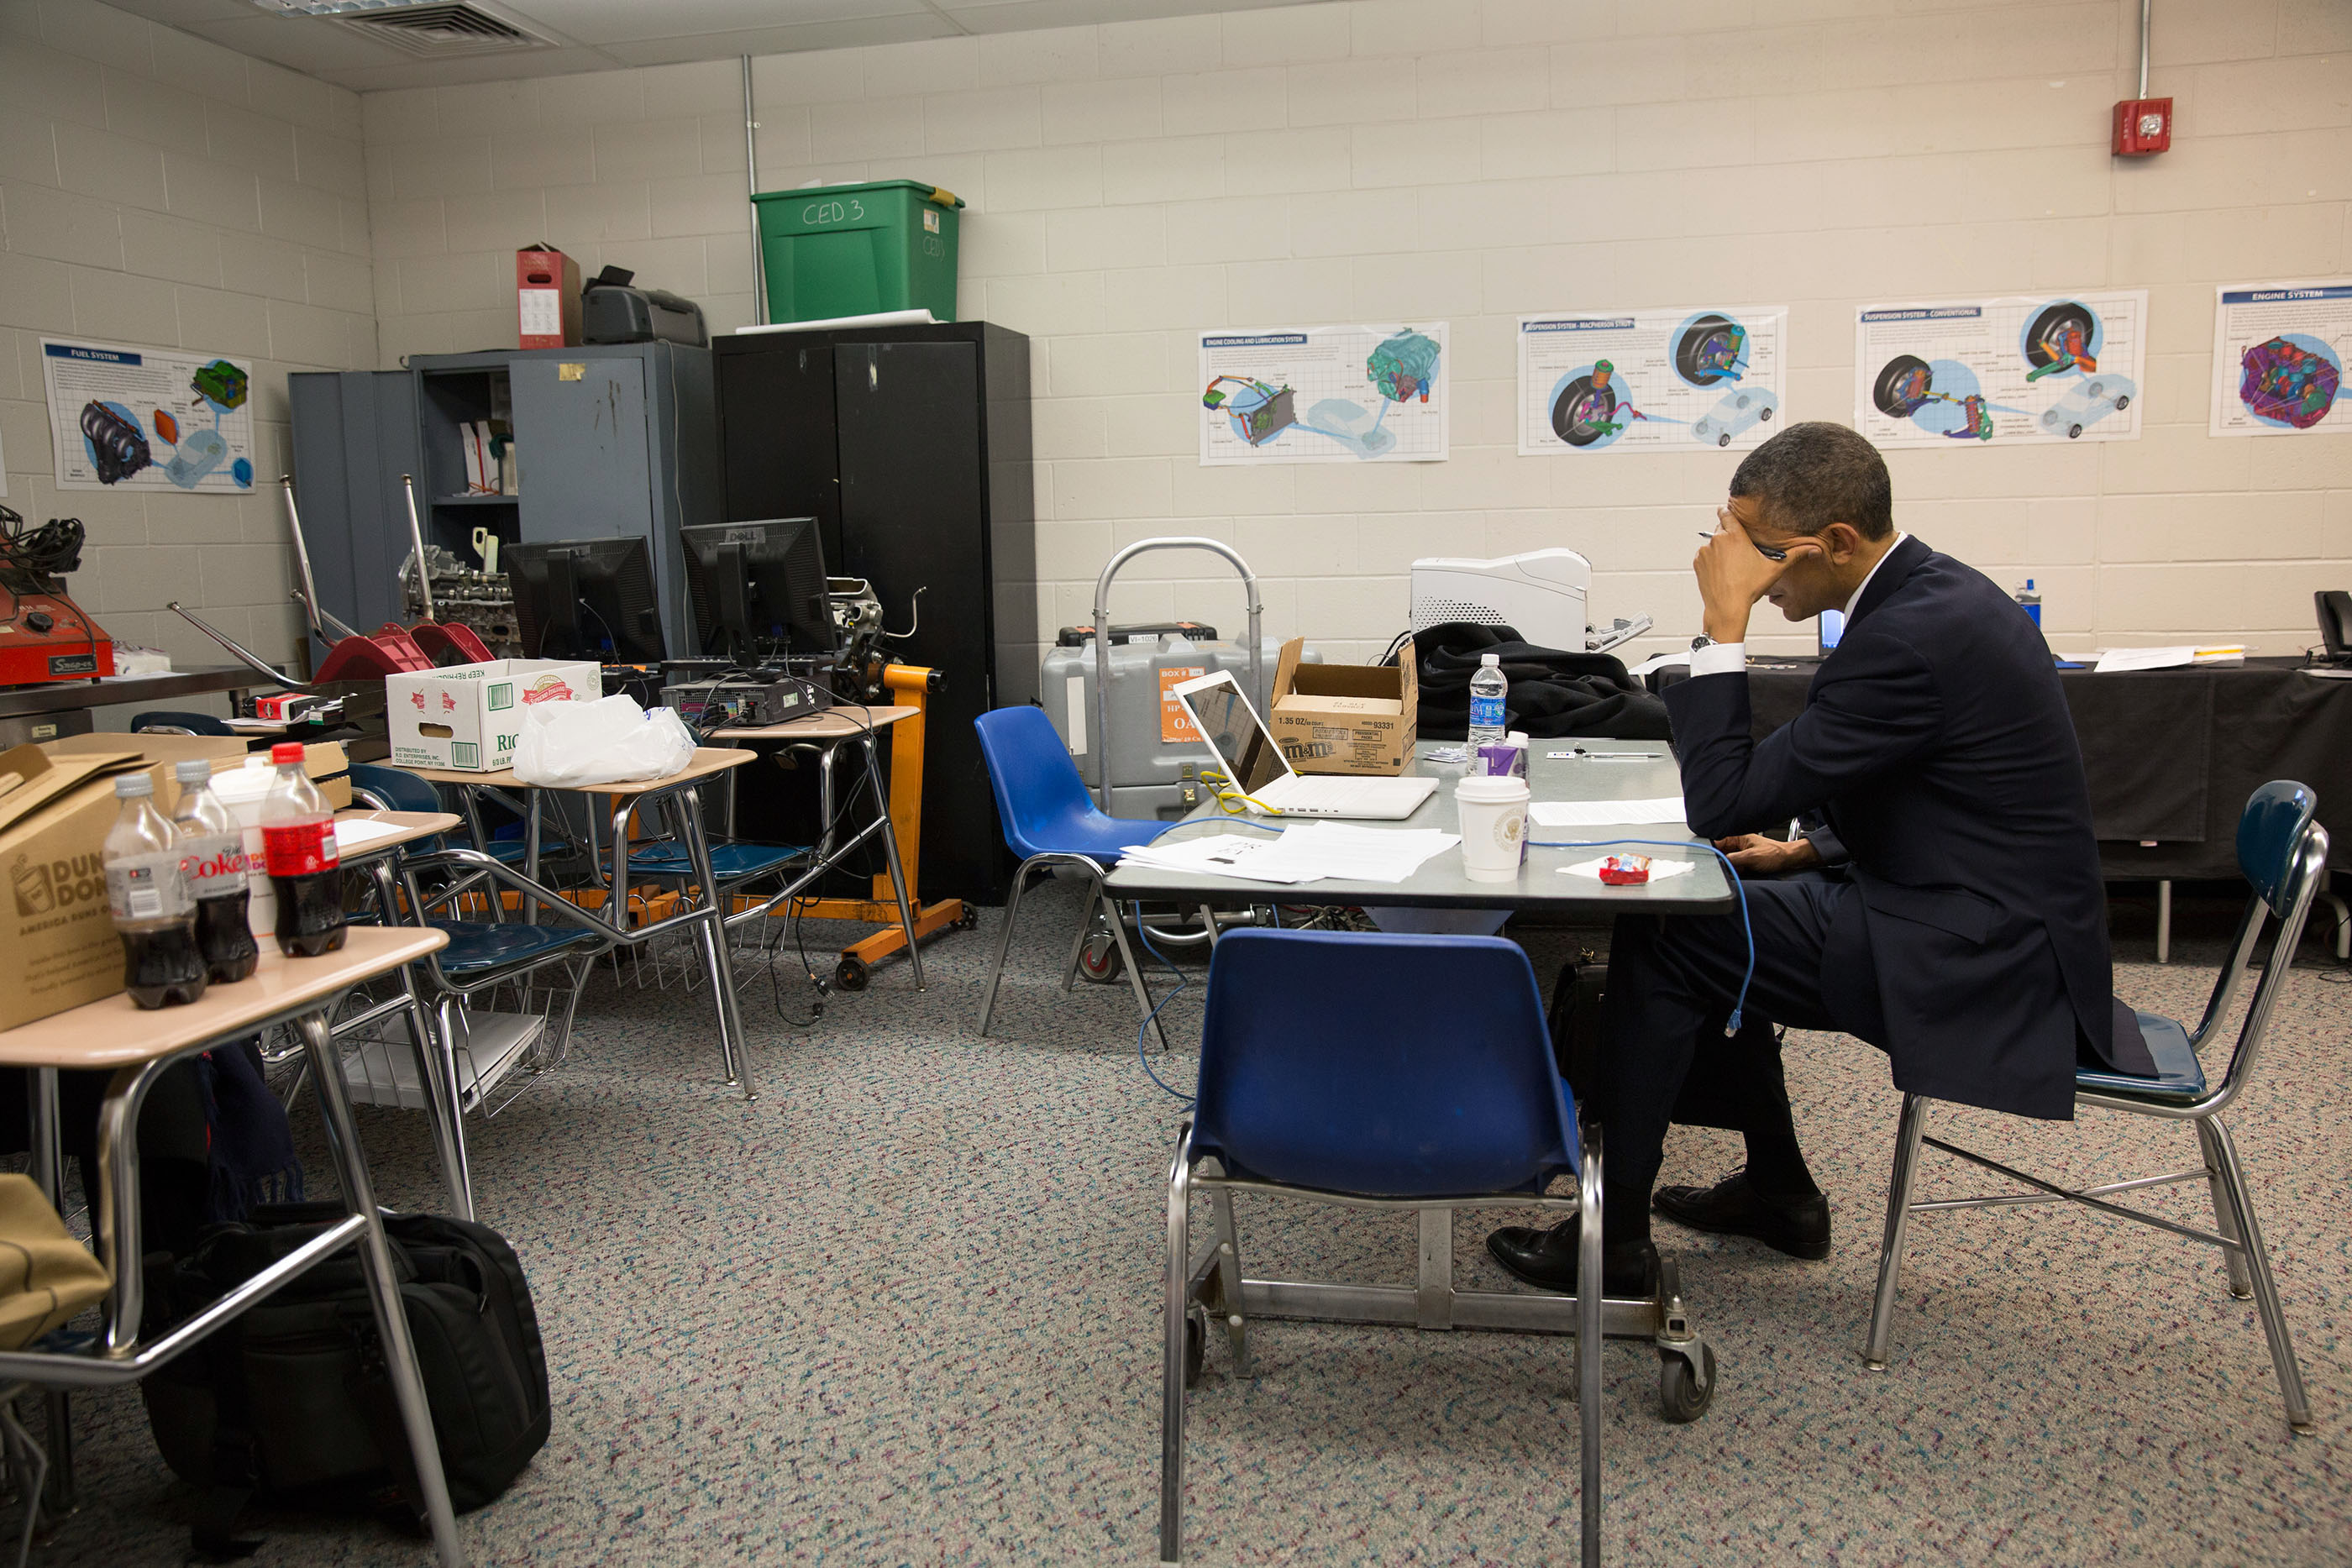 Connecticut, Dec. 16, 2012. Making last-minute edits to his speech in Newtown, before a vigil for those killed at Sandy Hook Elementary School. (Official White House Photo by Pete Souza)